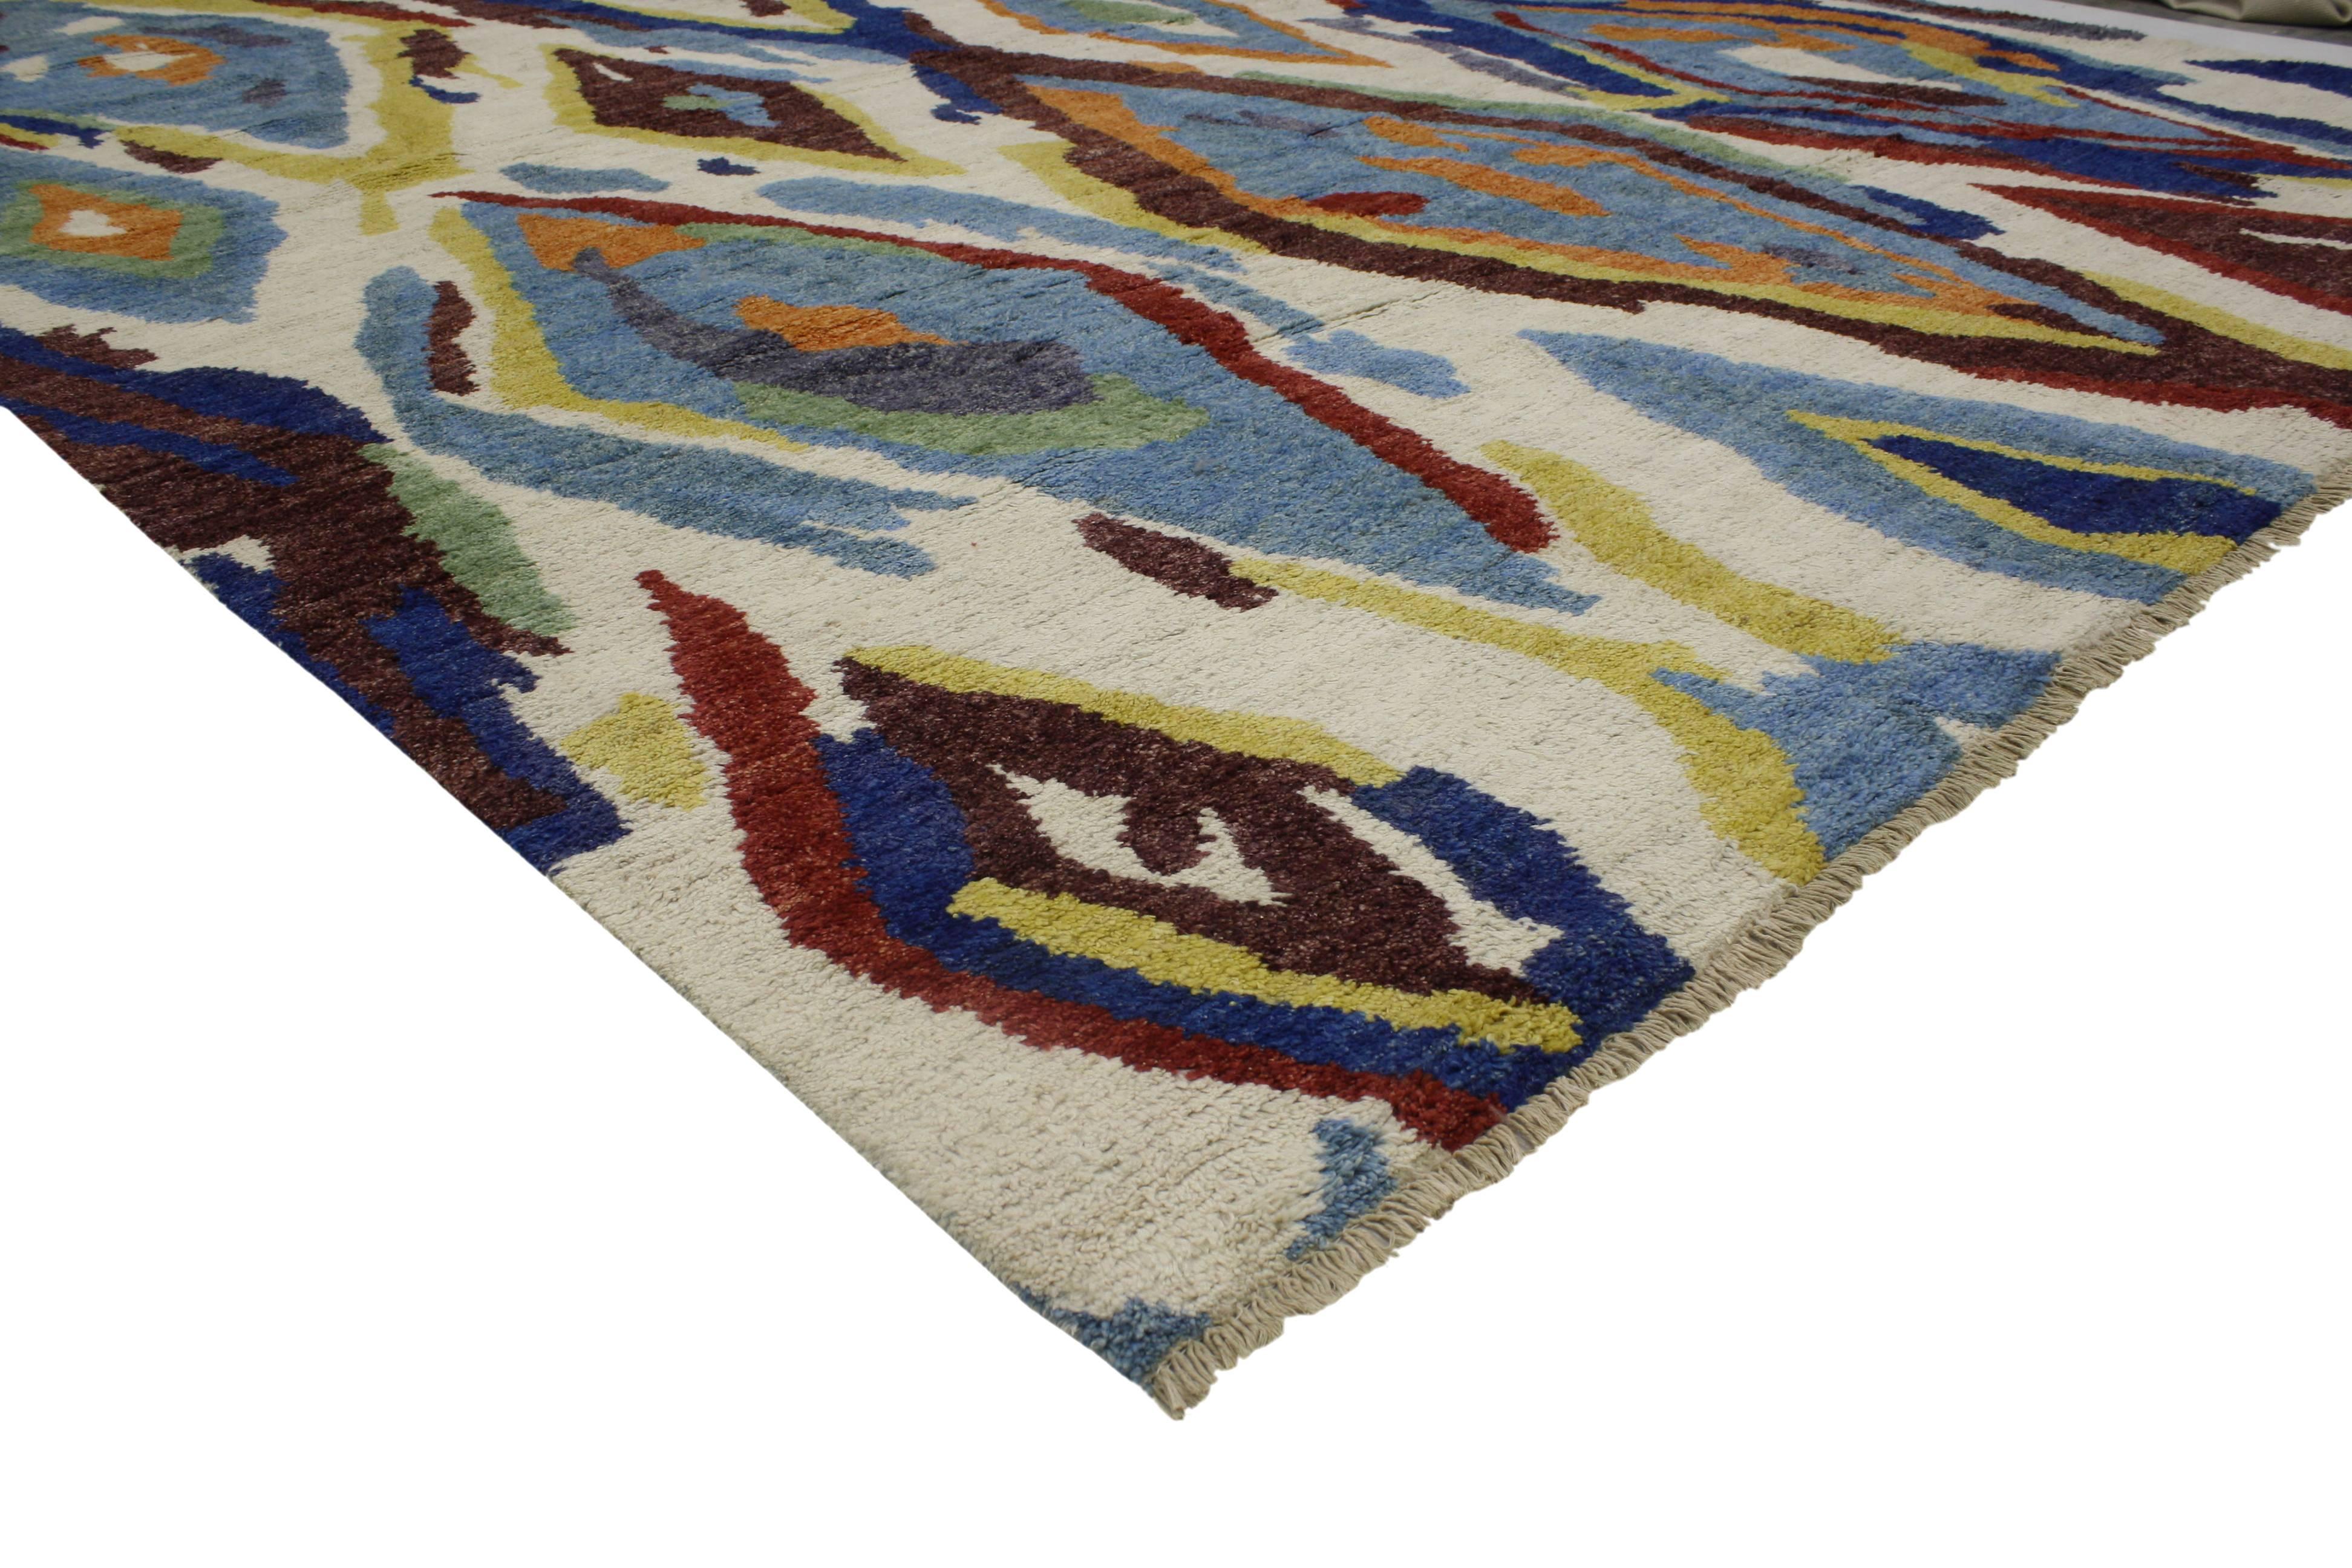 Pakistani New Colorful Contemporary Moroccan Area Rug with Postmodern Memphis Style